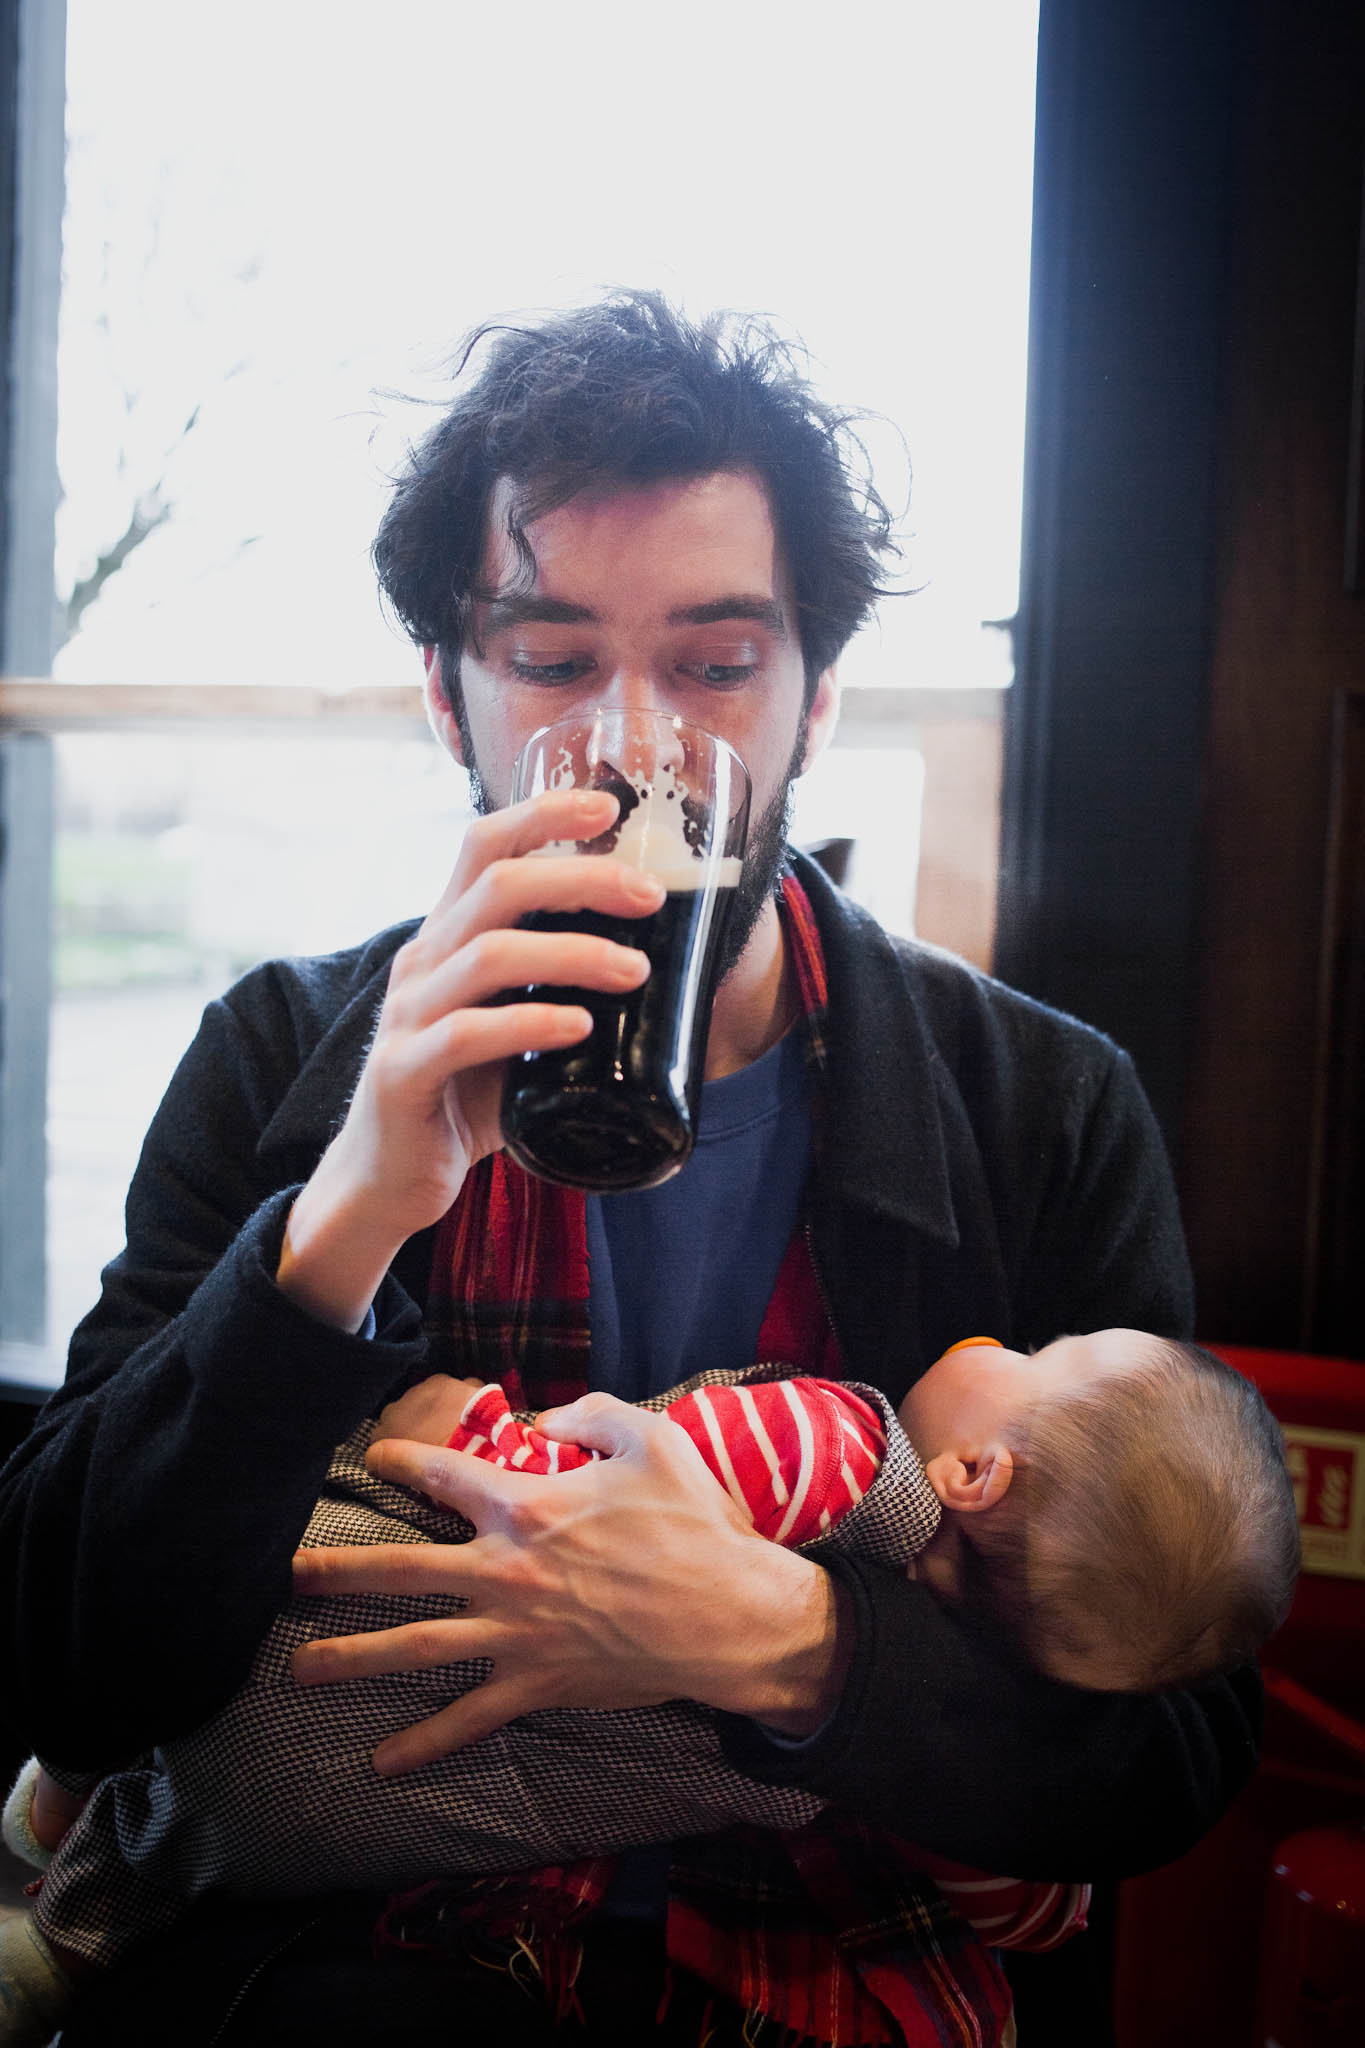 Father drinking pint of guinness watching baby daughter asleep in arms